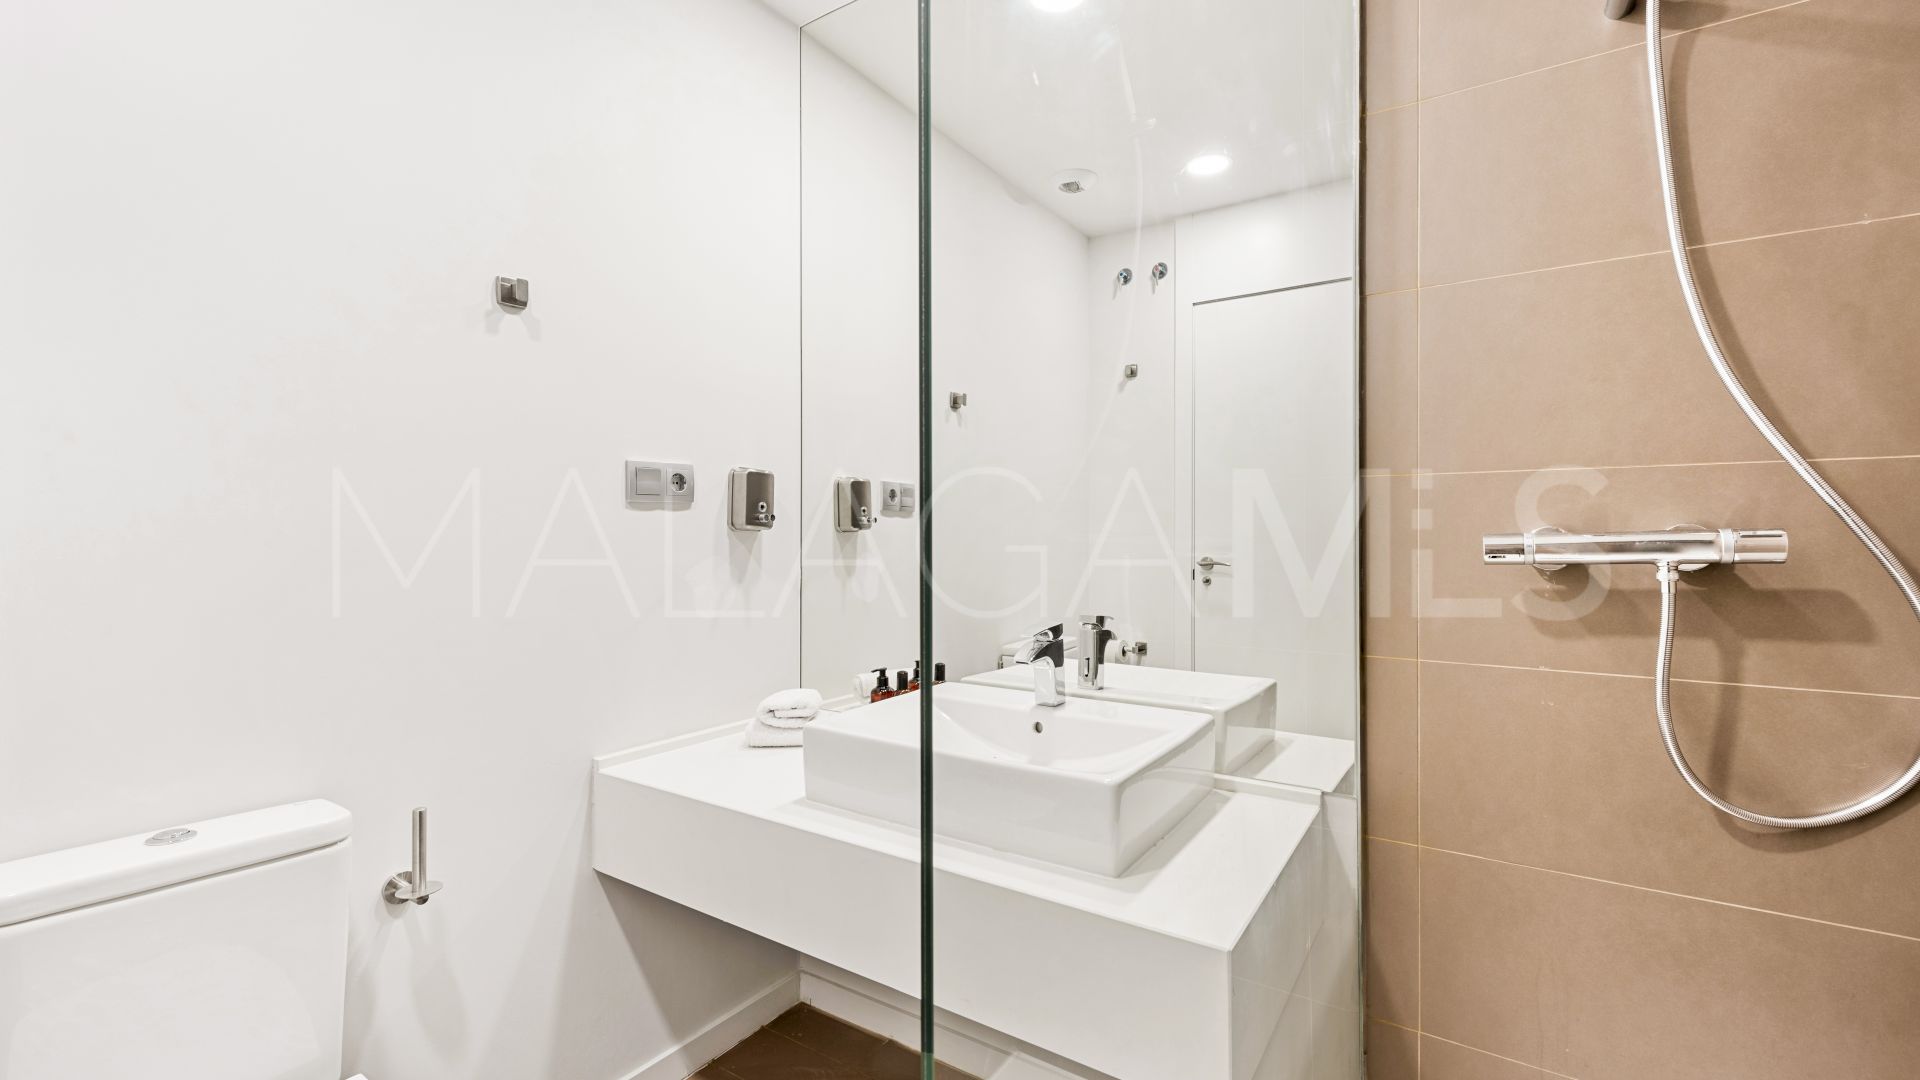 2 bedrooms duplex penthouse in Cancelada for sale